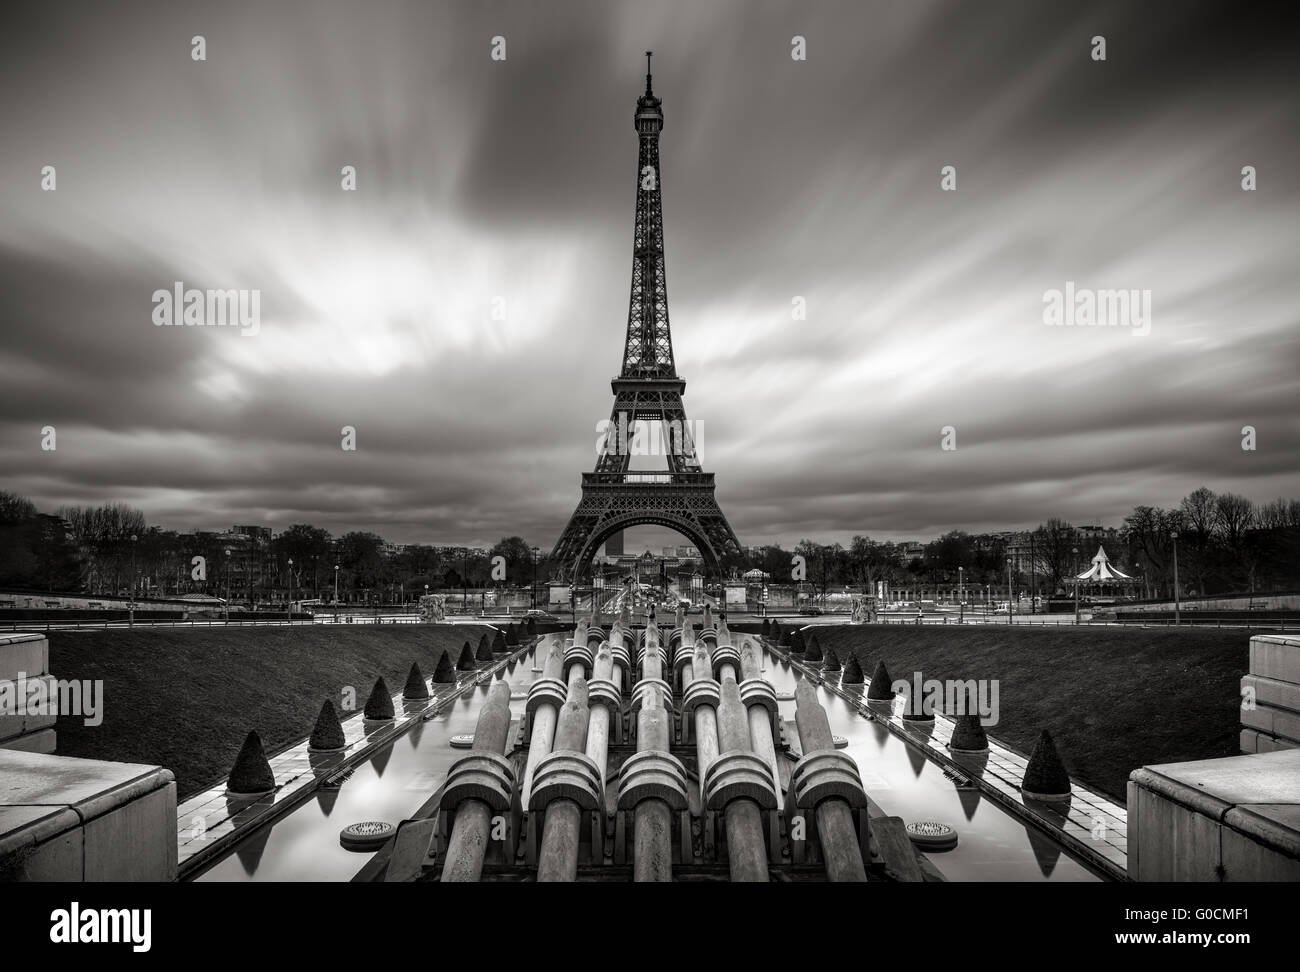 Eiffel Tower and Trocadero at sunrise with fast moving clouds, Paris, France. Black & White. Stock Photo